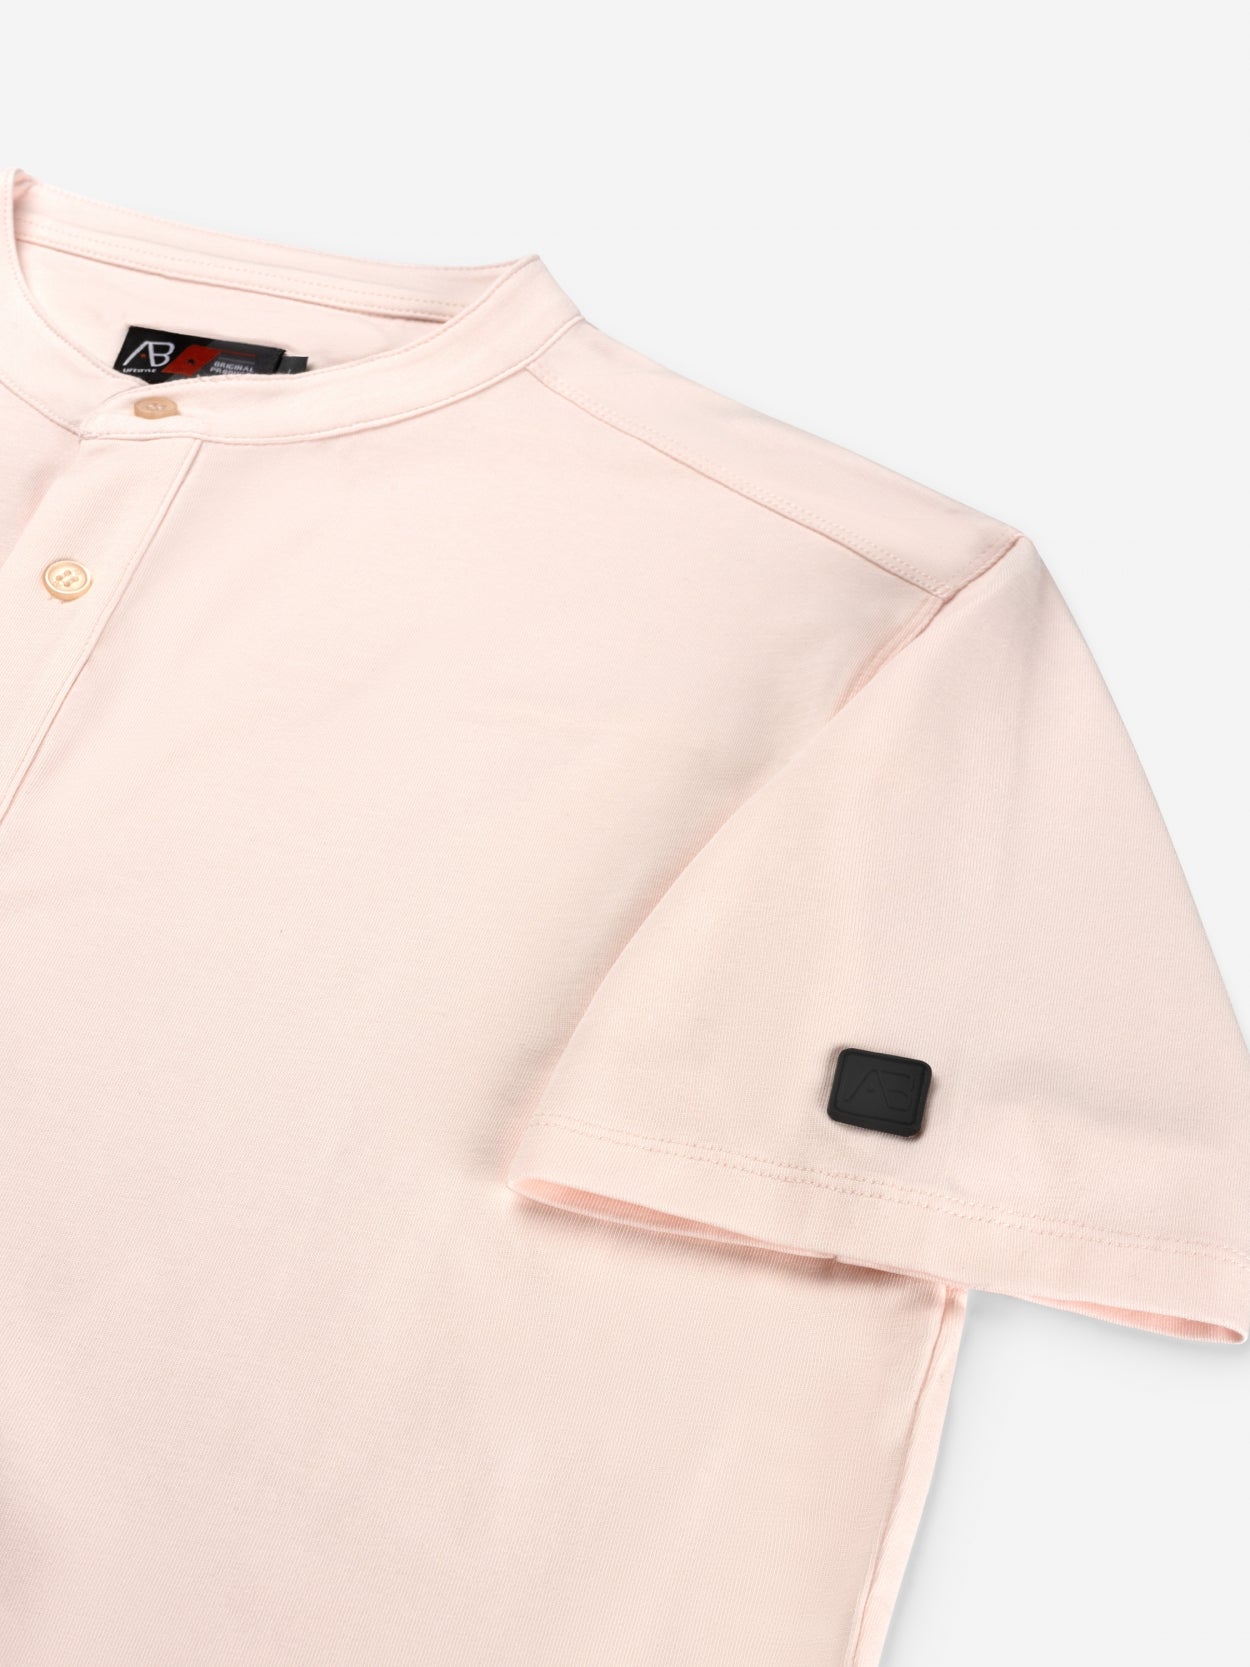 Button Up Short-Sleeve | Barely Pink